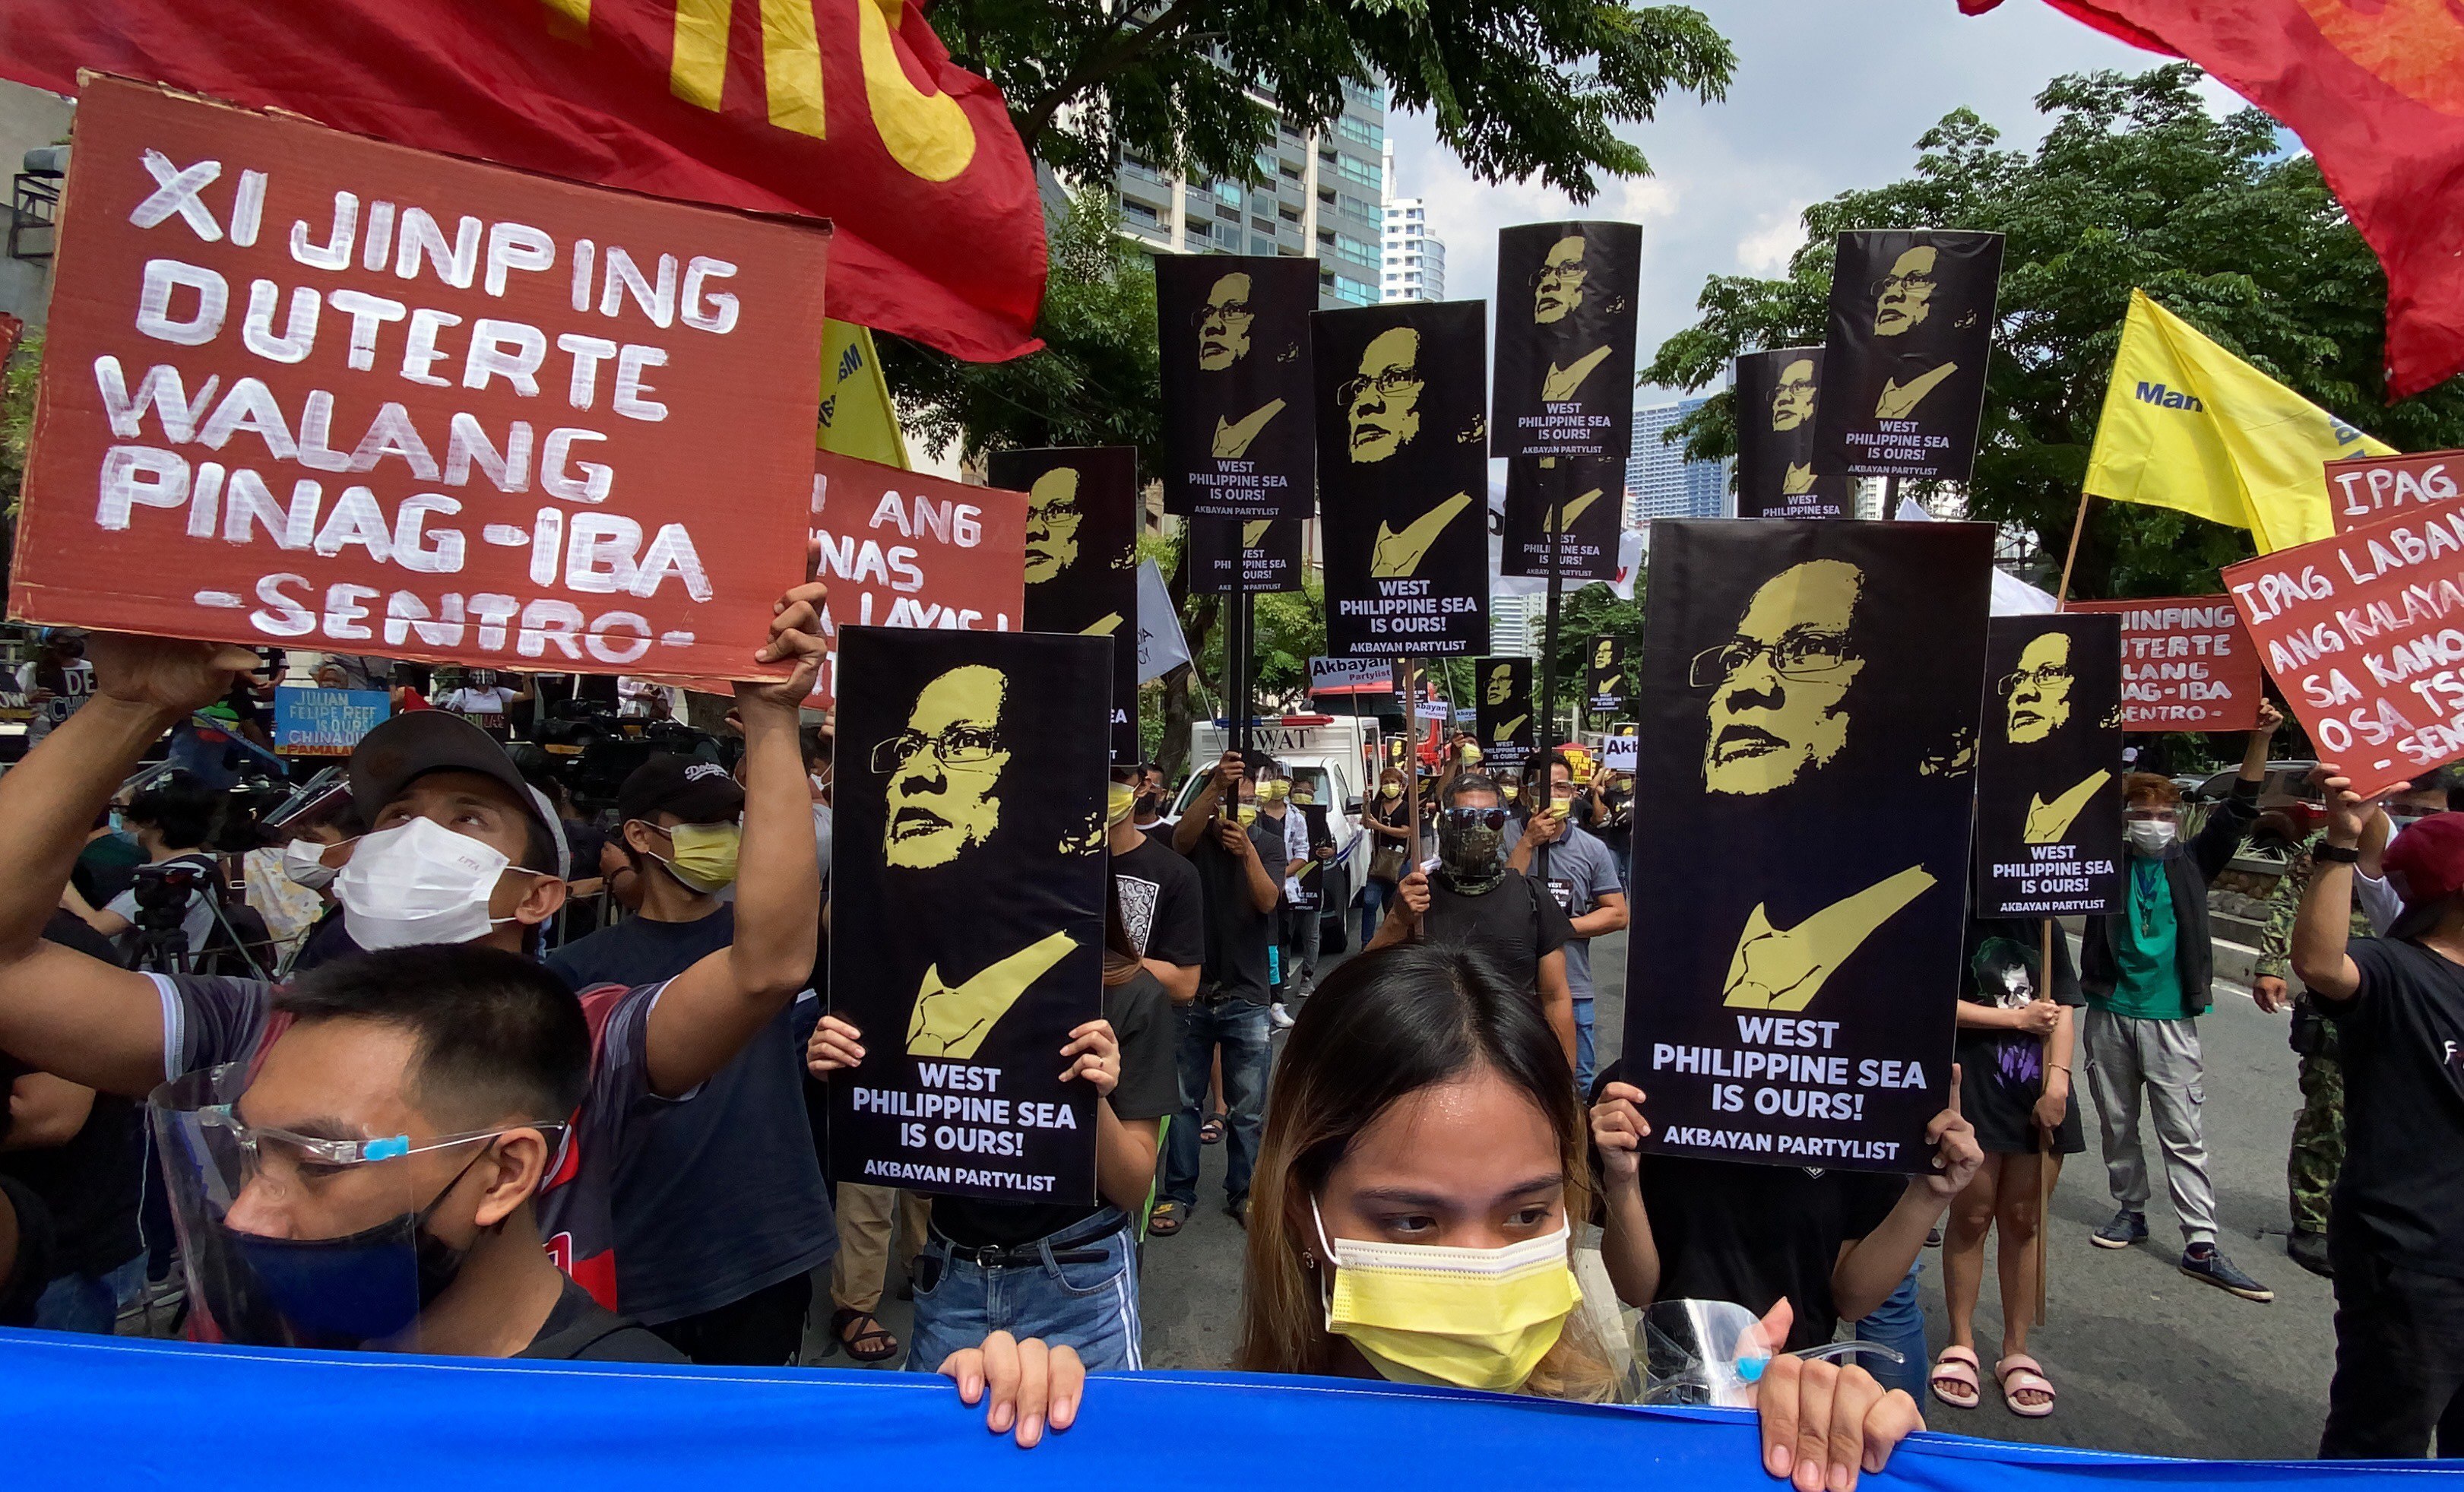 Filipino protesters hold placards during a rally outside the Chinese consular office in Manila on July 12. The demonstration marked the fifth anniversary of the country’s victory at the Permanent Court of Arbitration in favour of the Philippines’ claims in the South China Sea. Photo: EPA-EFE